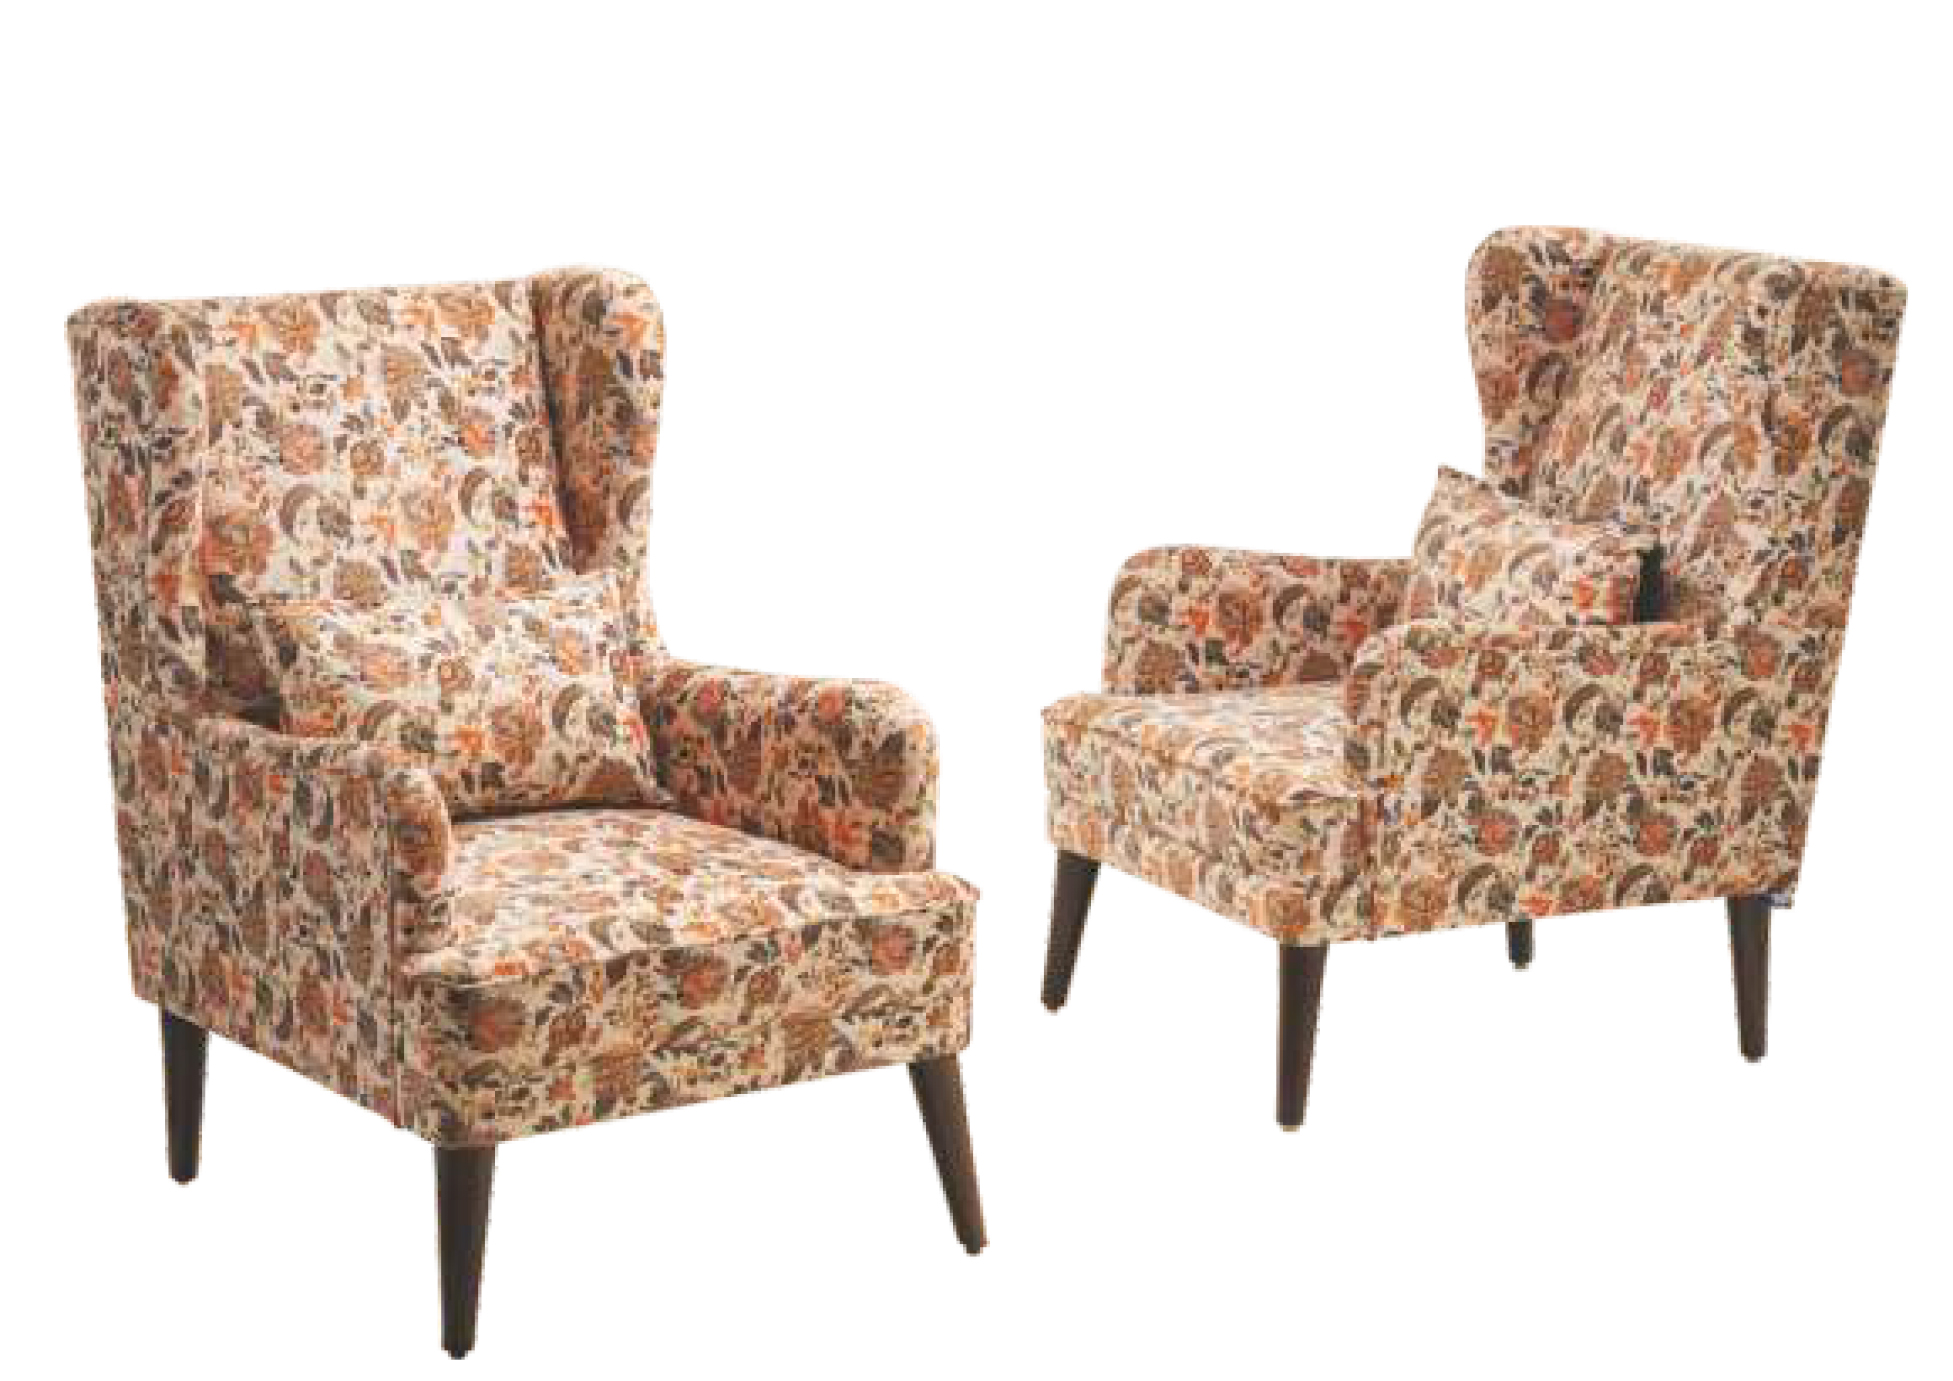 VALLEY SET OF 2 Lobby & Bedroom Chairs